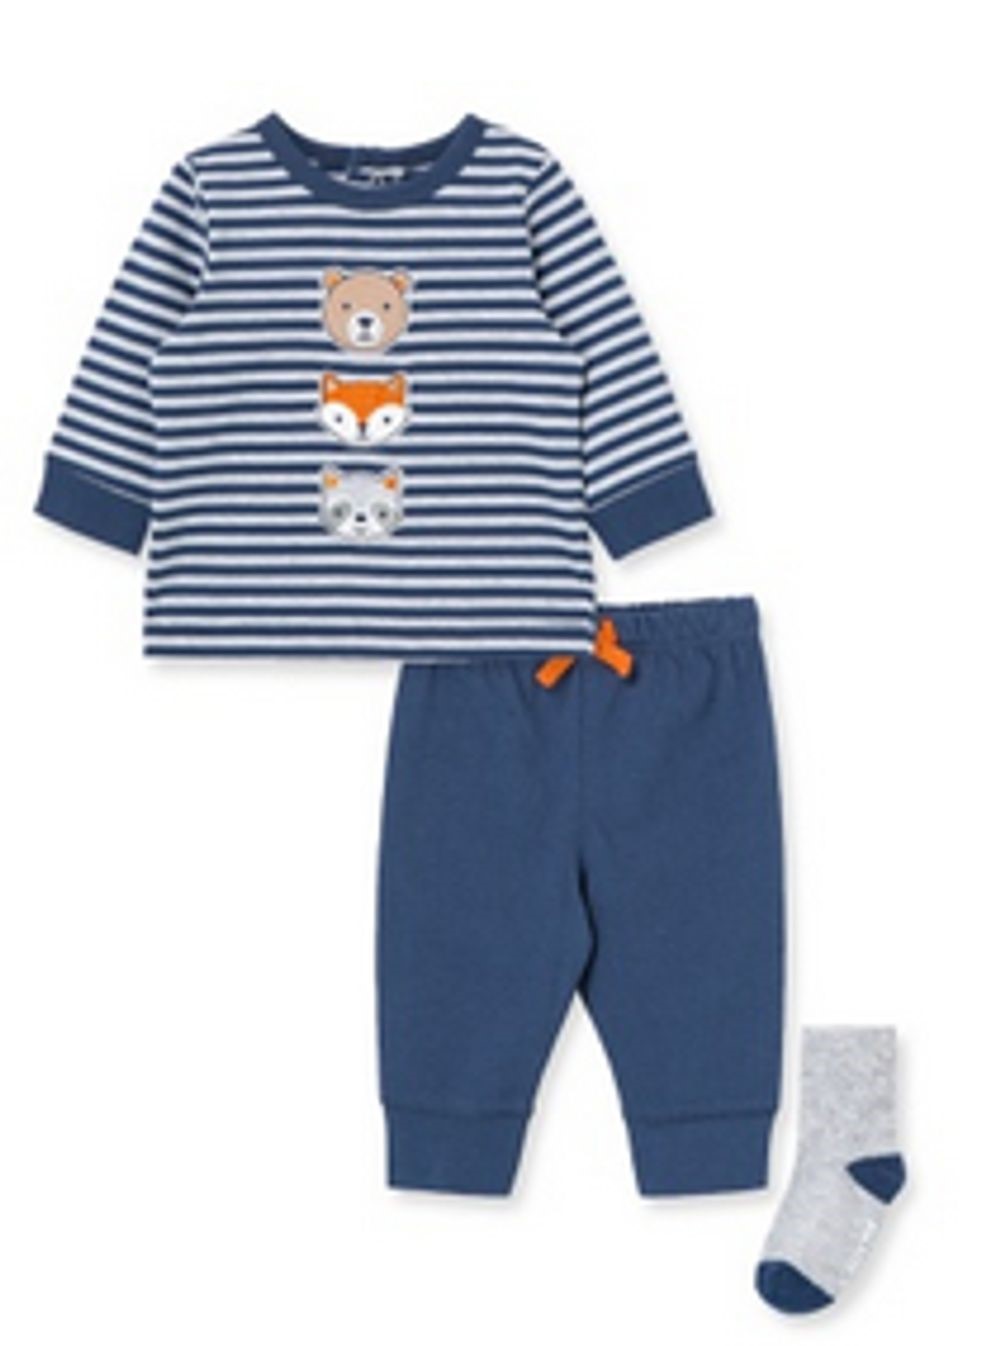 LITTLE ME L457 BABY BOYS 2 PIECE WOODLAND JOGGER SET WITH MATCHING SOCKS